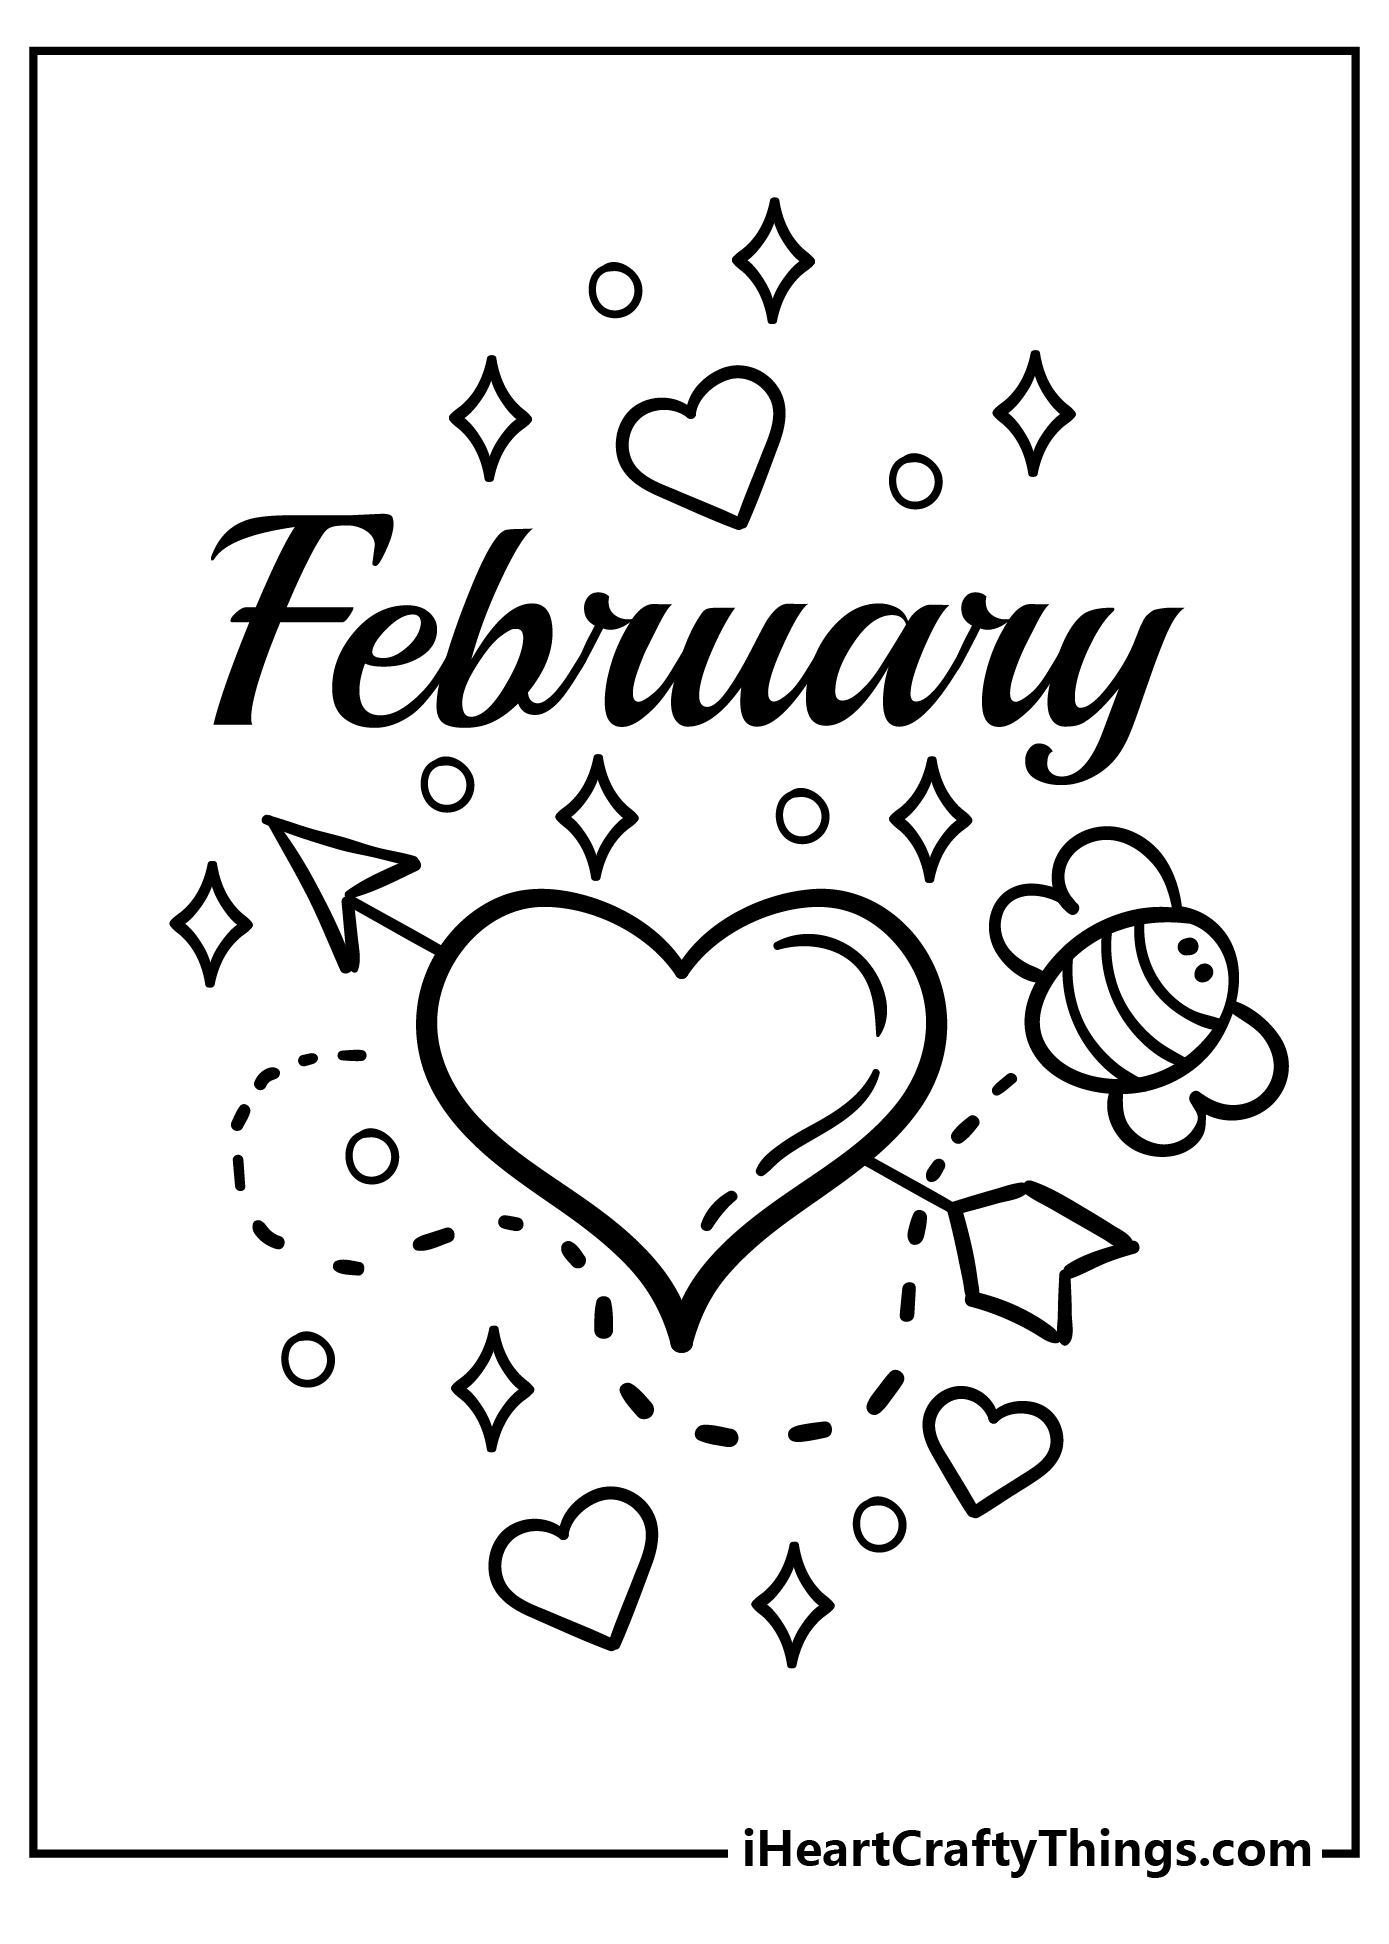 February Coloring Original Sheet for children free download